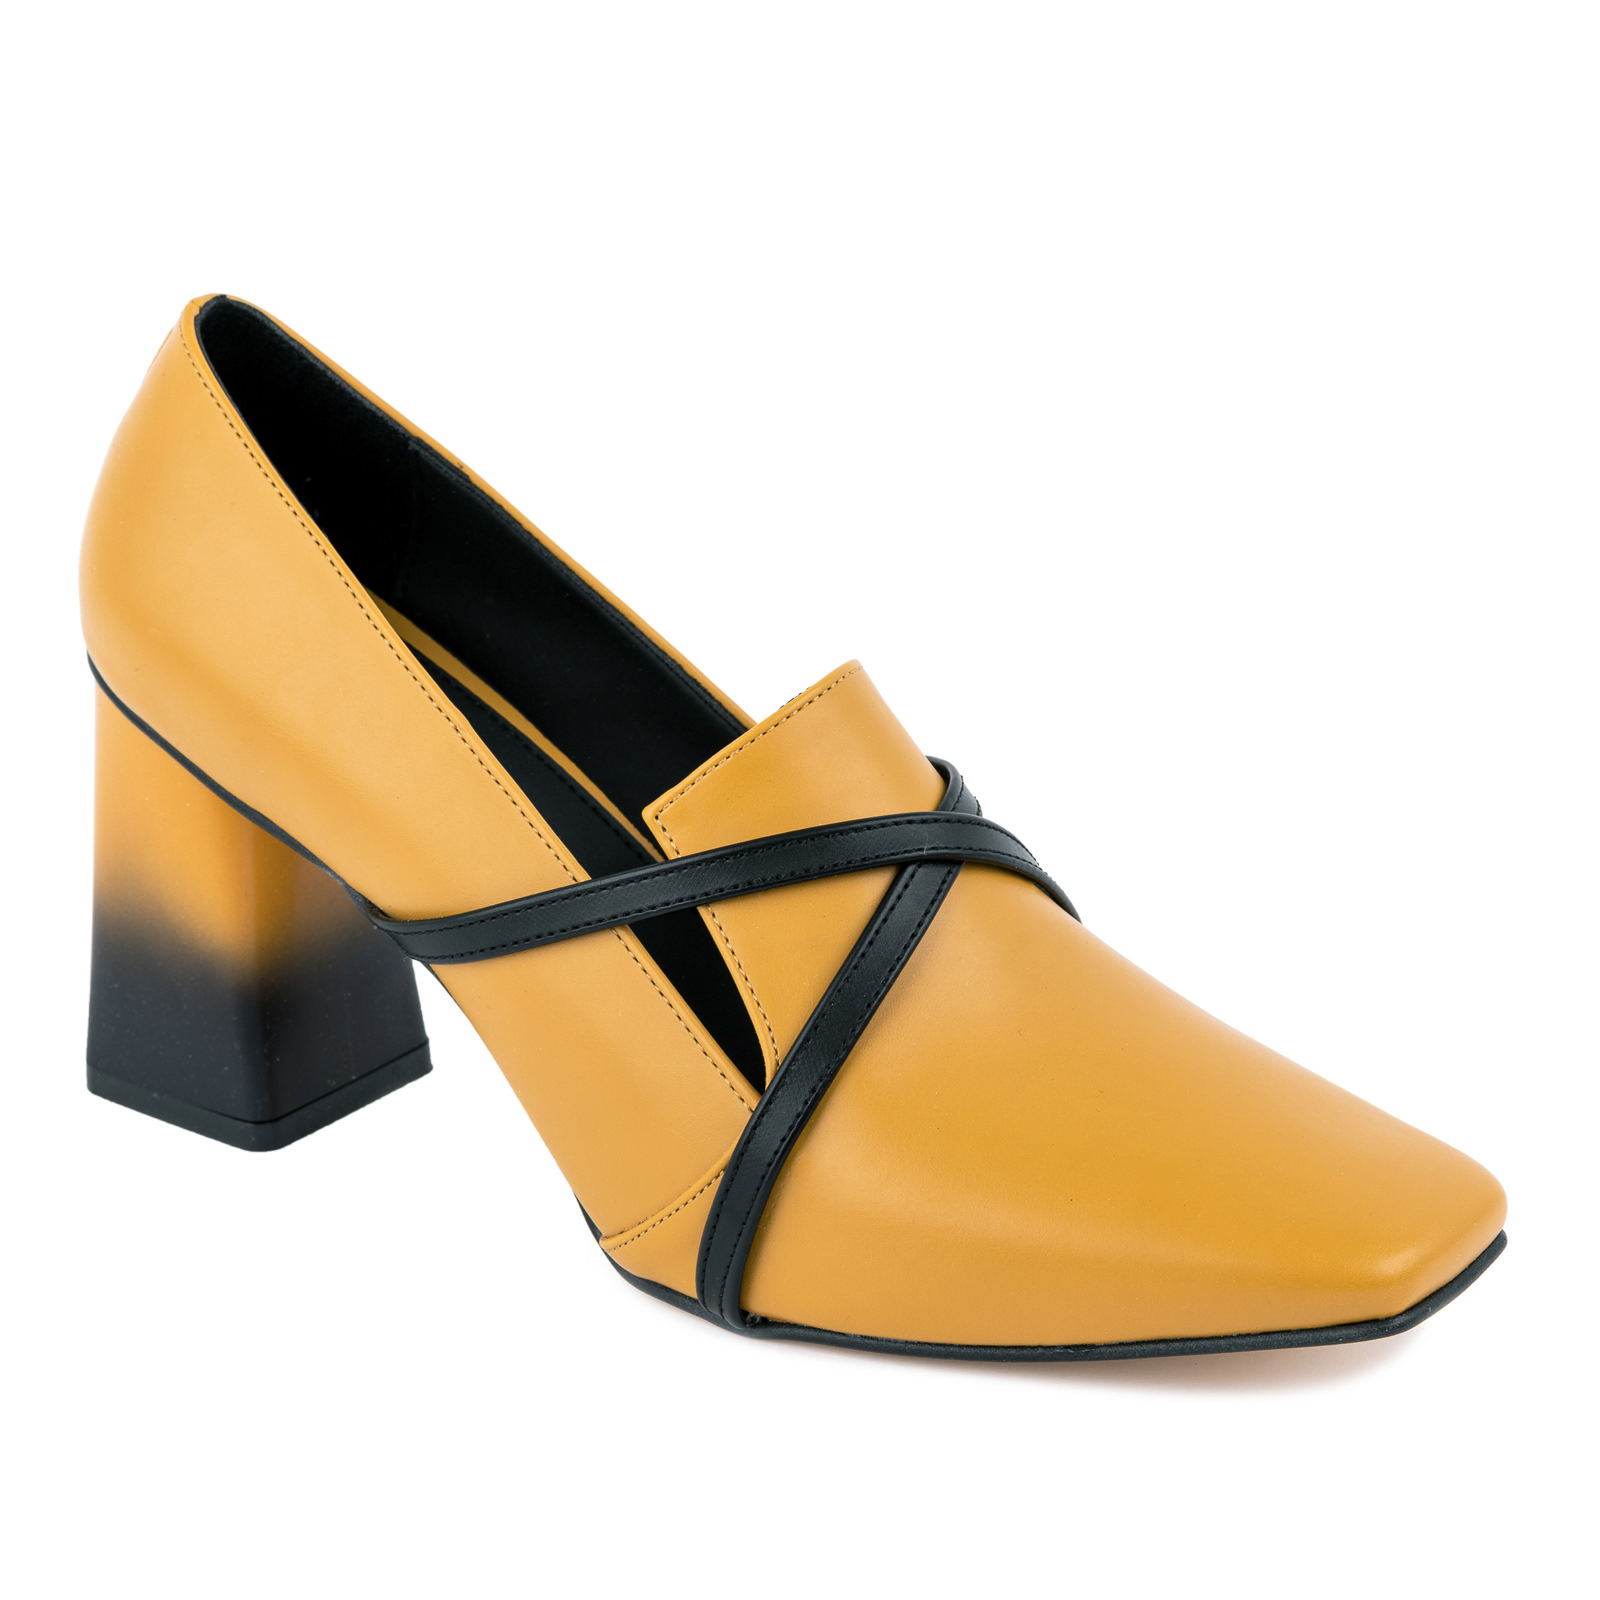 SHOES WITH BLOCK HEEL - YELLOW